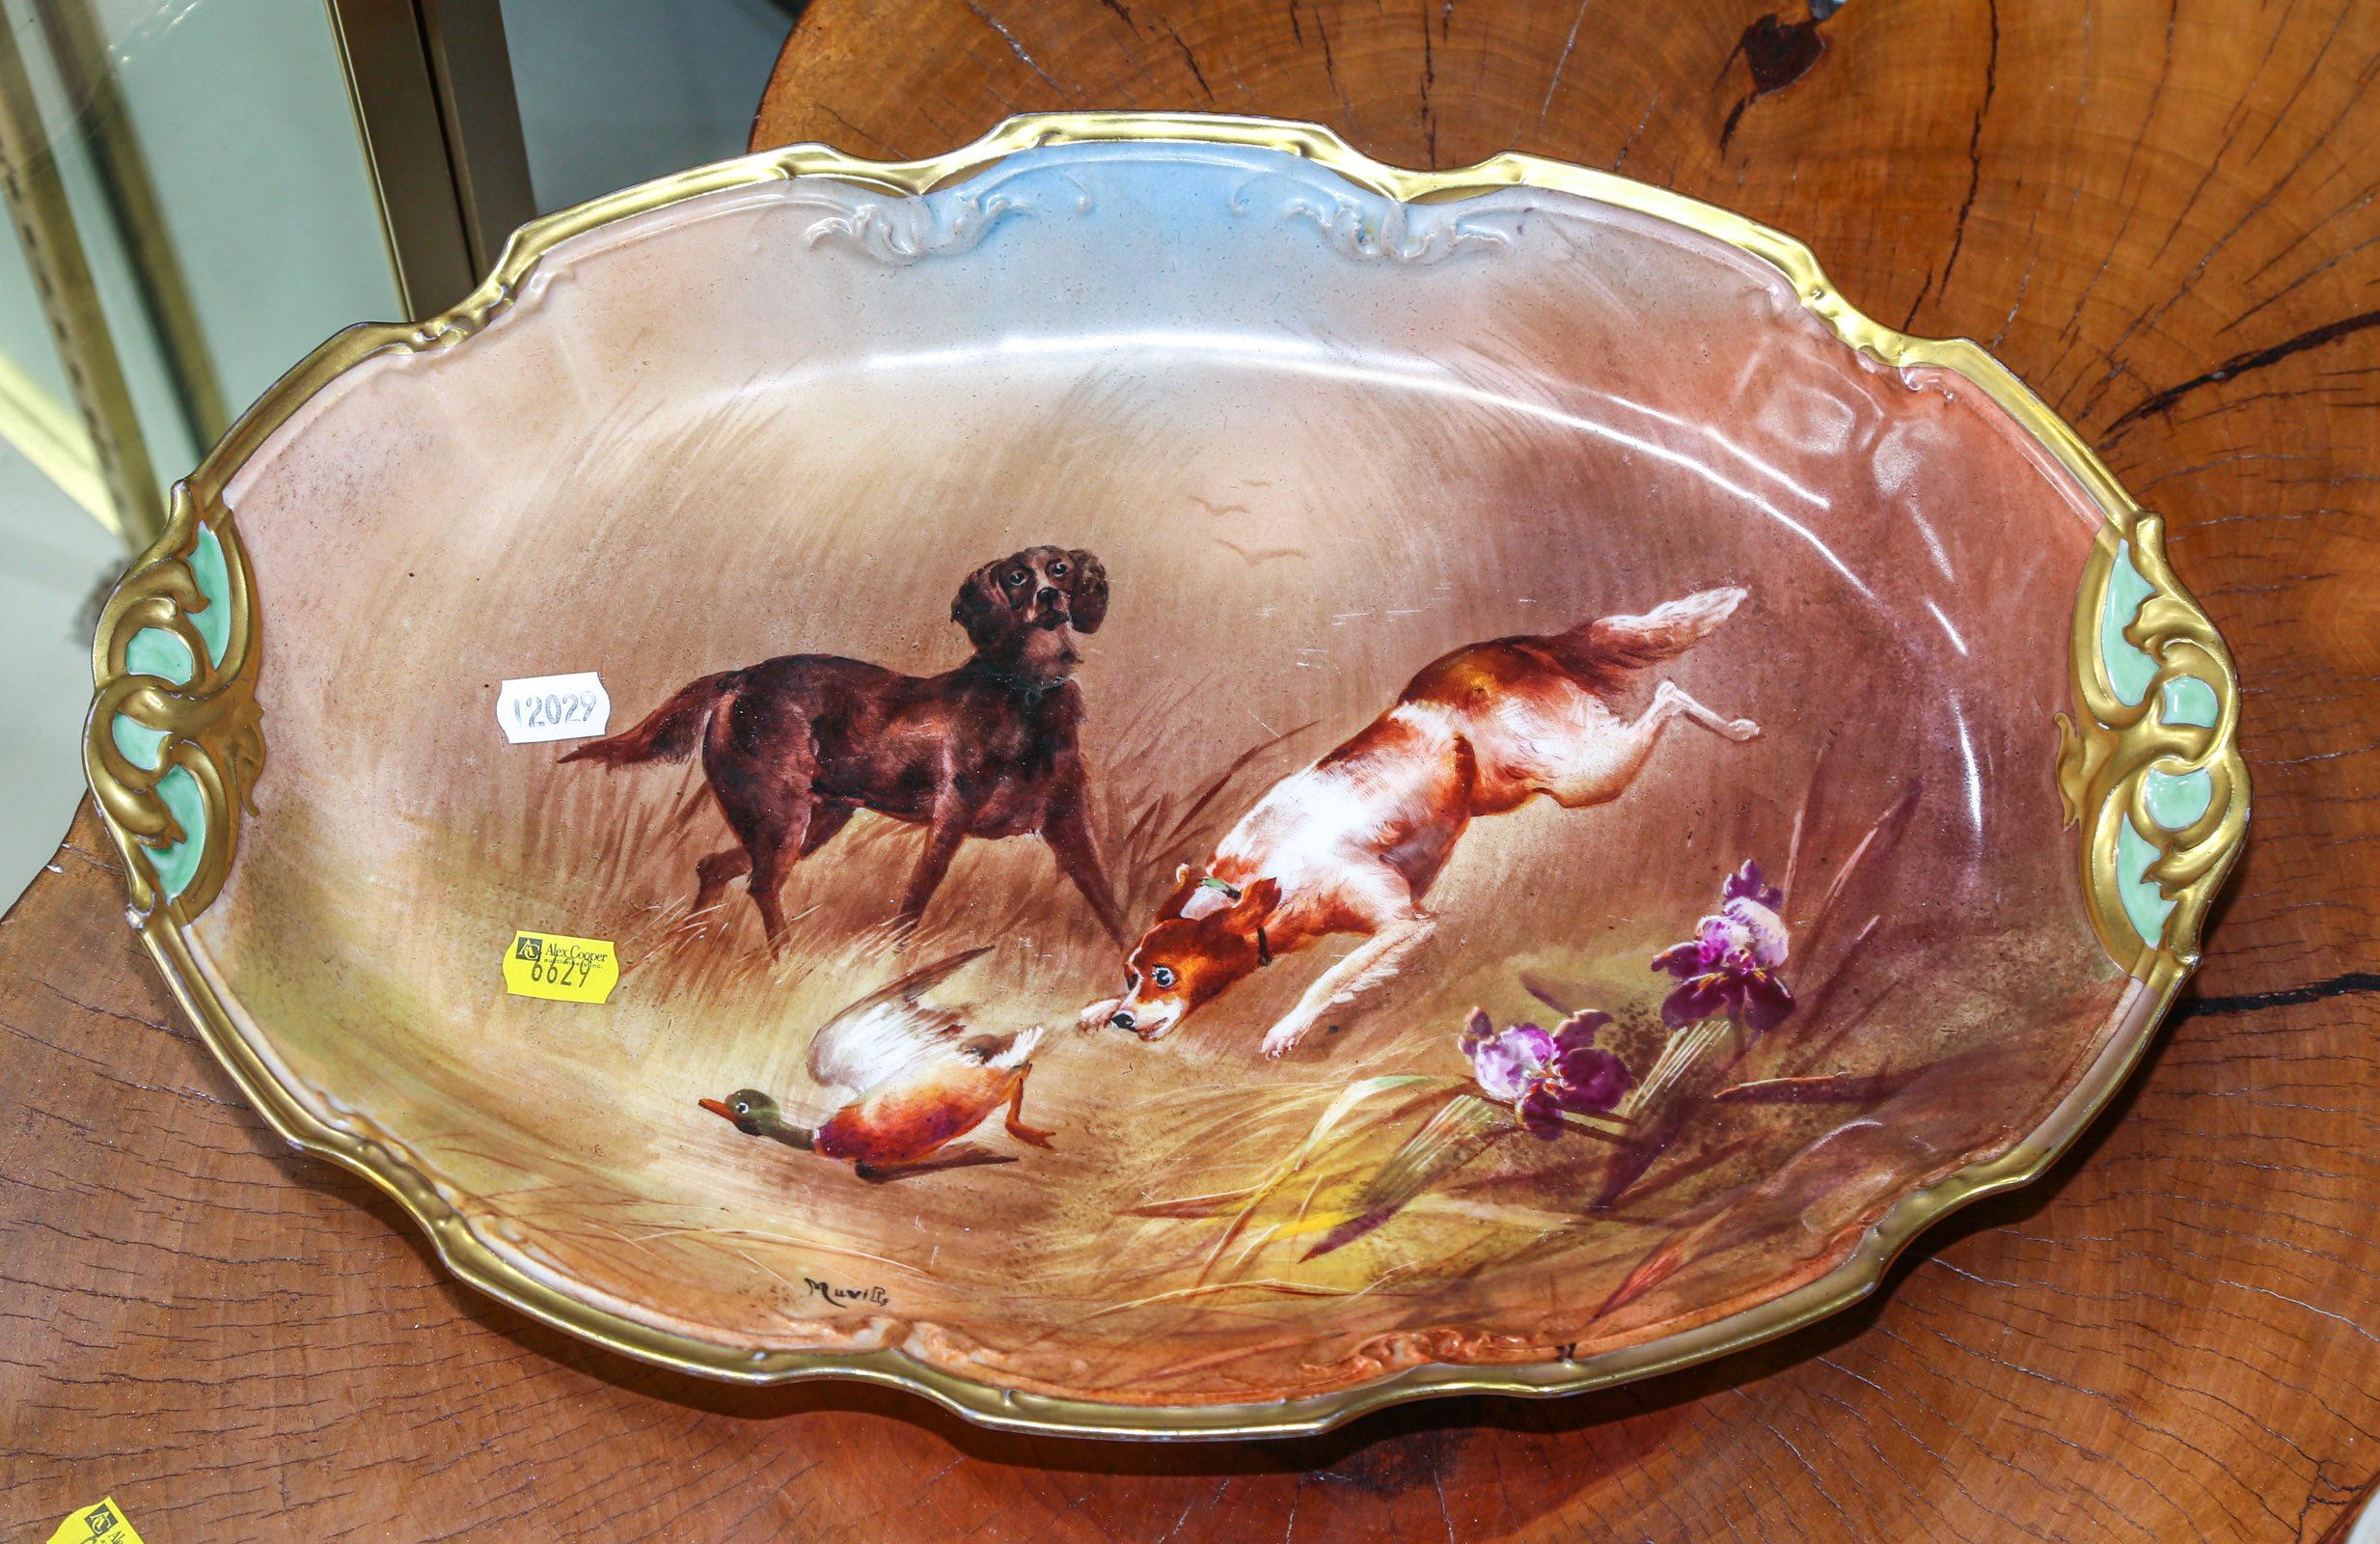 LARGE HAND PAINTED LIMOGES PLATTER 2e942b